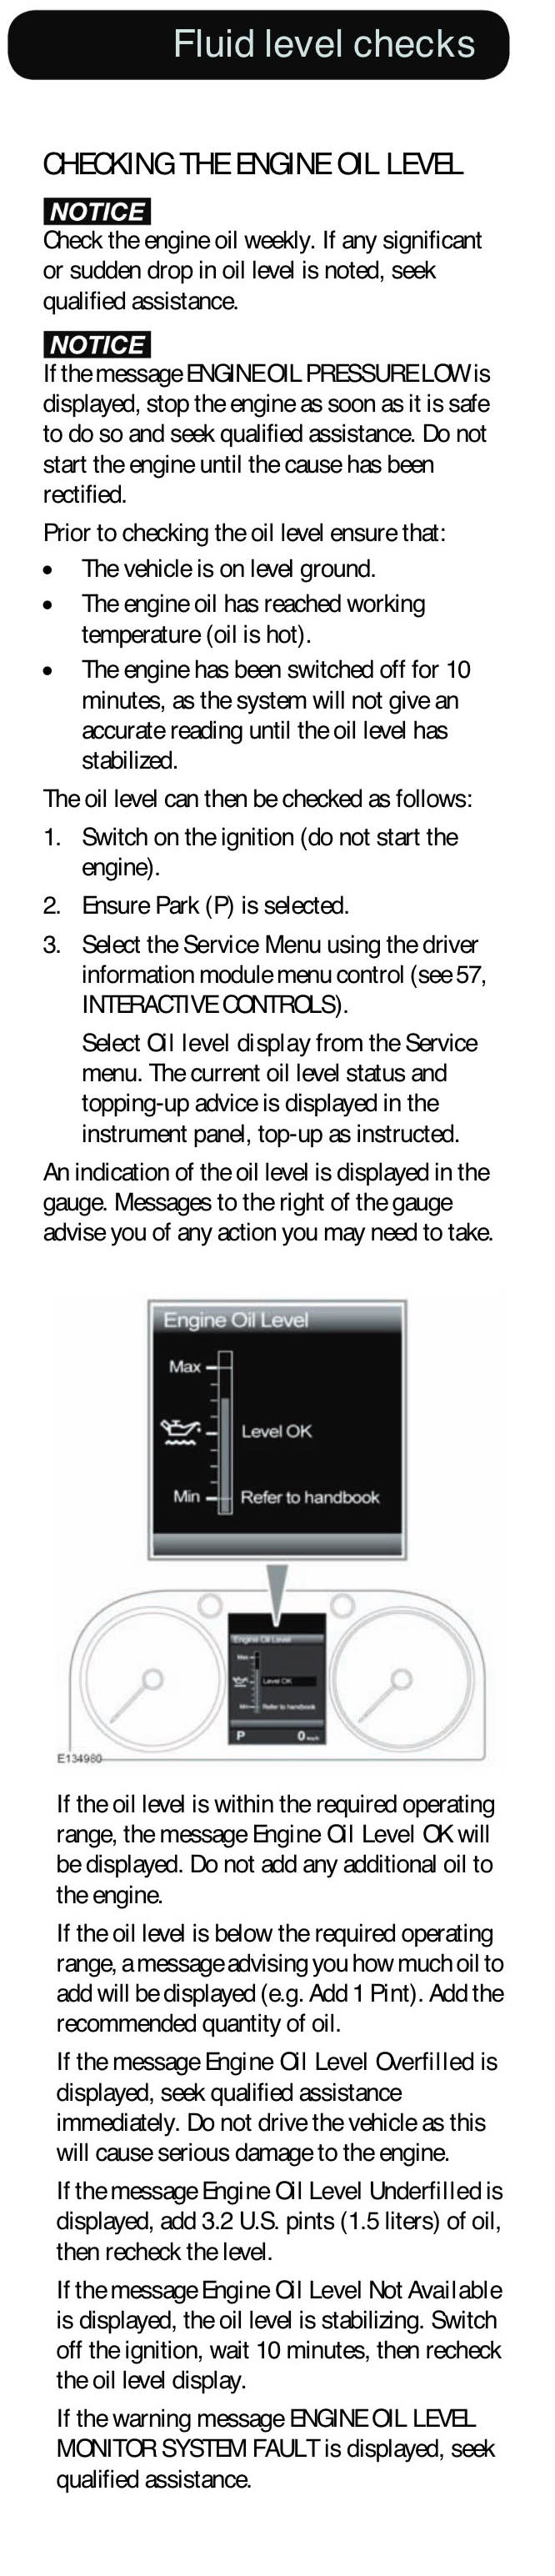 Land Rover Oil Level Check with Dash Display Panel.jpg